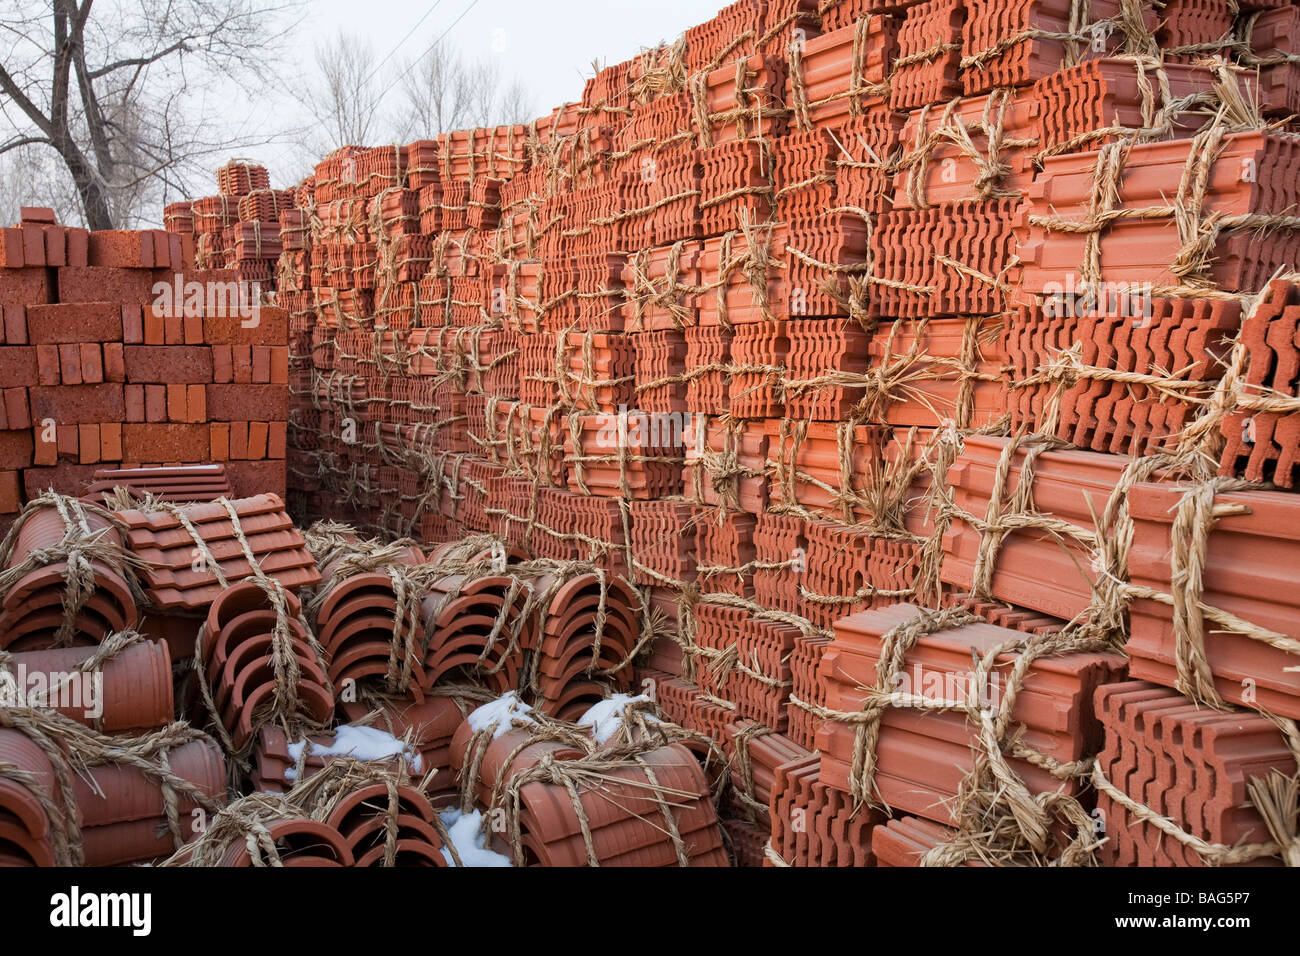 Roof tiles baked from earth deposits in northern China Stock Photo